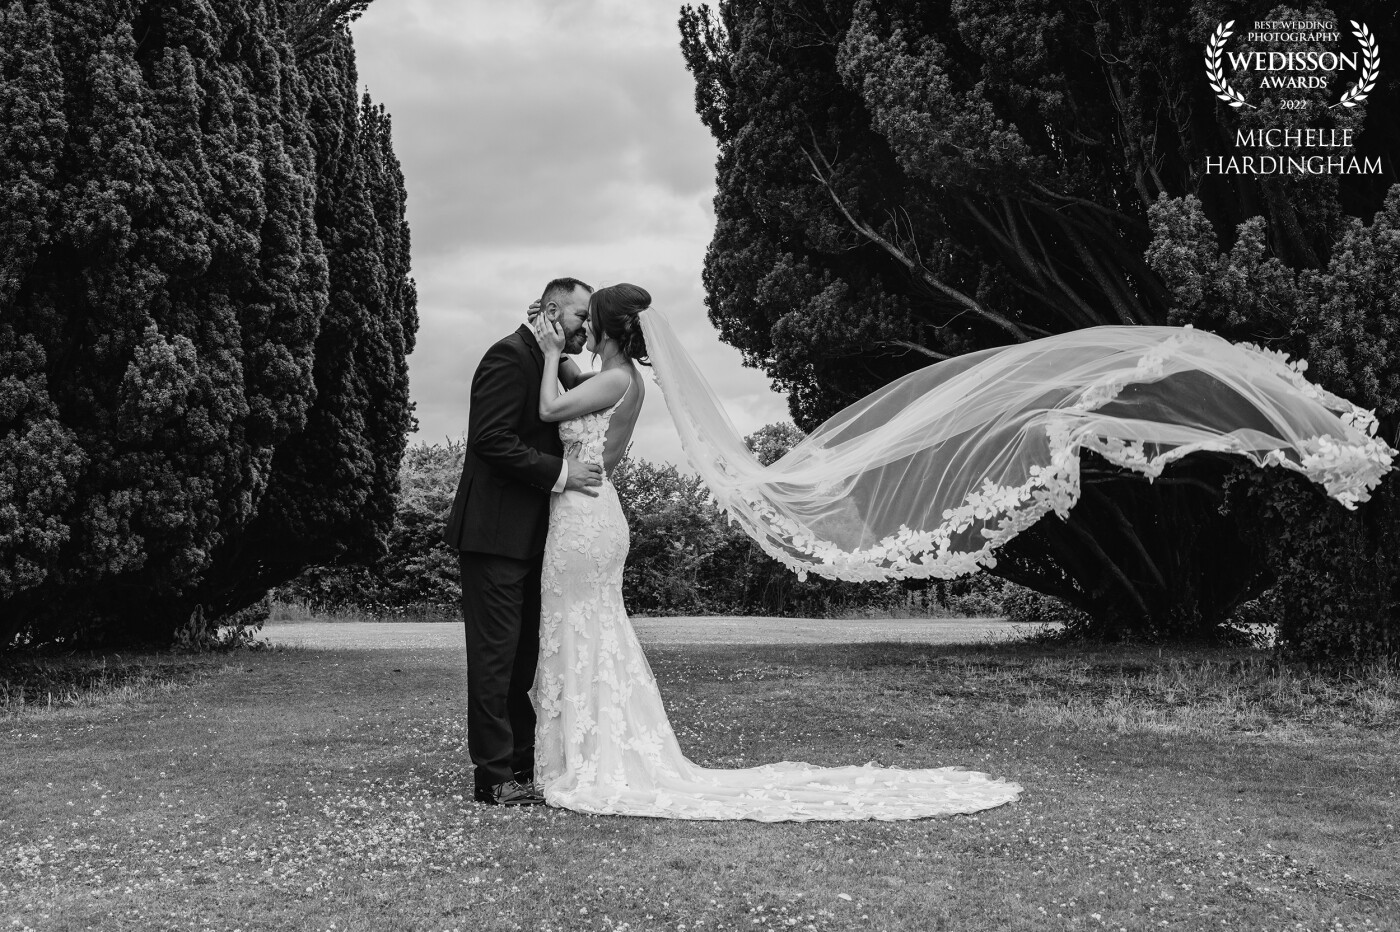 The wedding of dreams, a classic black tie wedding. I declare I’ll never be over Emma’s stunning dress and veil. We just had to show it off to its full potential!